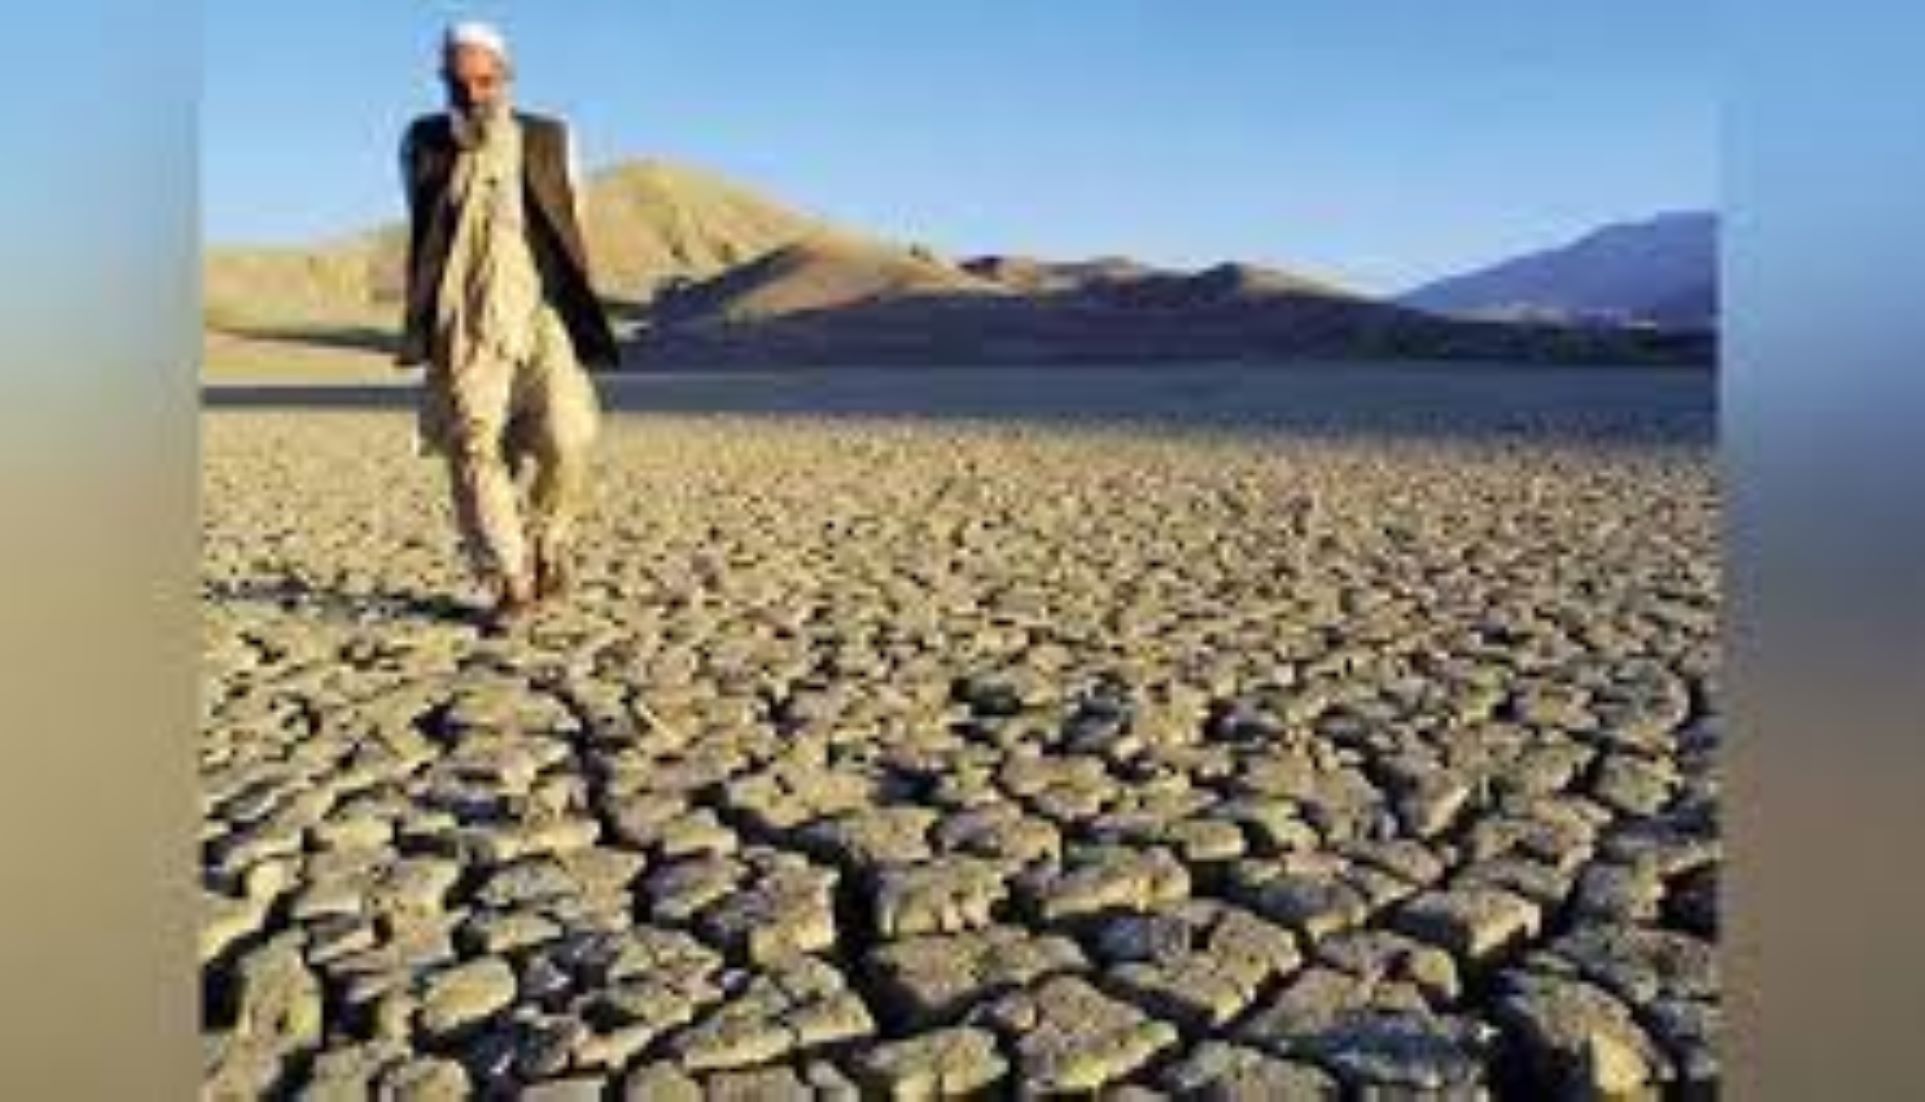 Climate Change To Incur Up To 20 Percent Loss To Pakistan’s GDP By 2050: World Bank